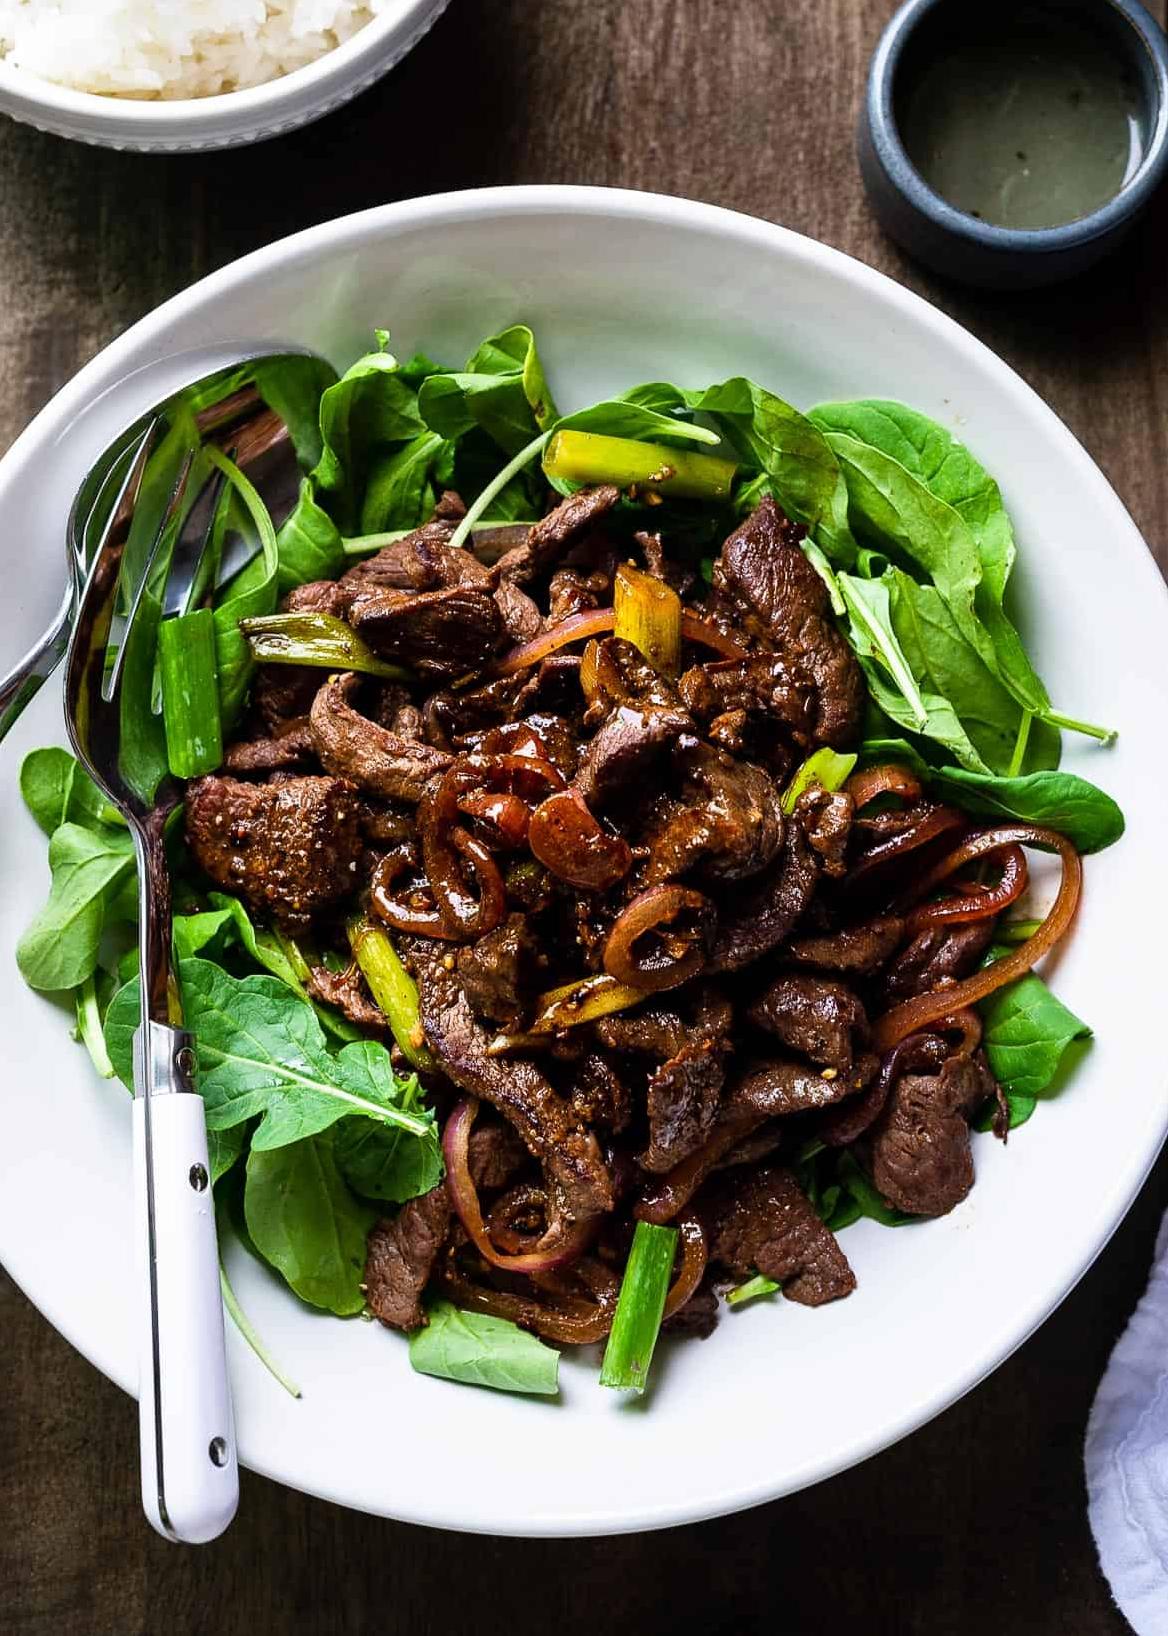  This is a salad that's bound to leave you feeling both energized and full, thanks to the inclusion of protein-rich beef.